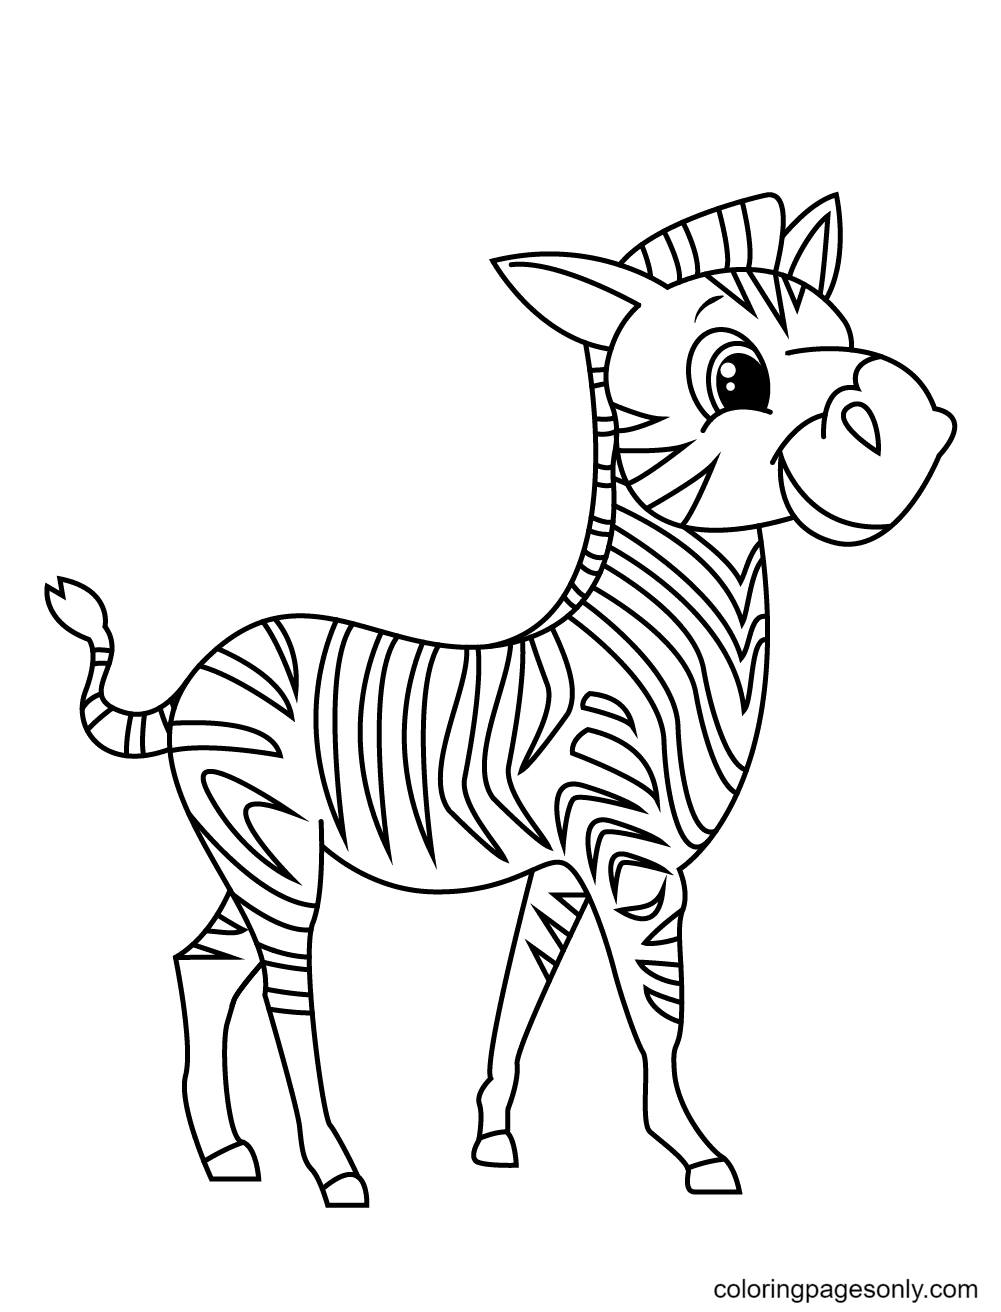 A Cute Zebra Looking Very Proud Coloring Pages